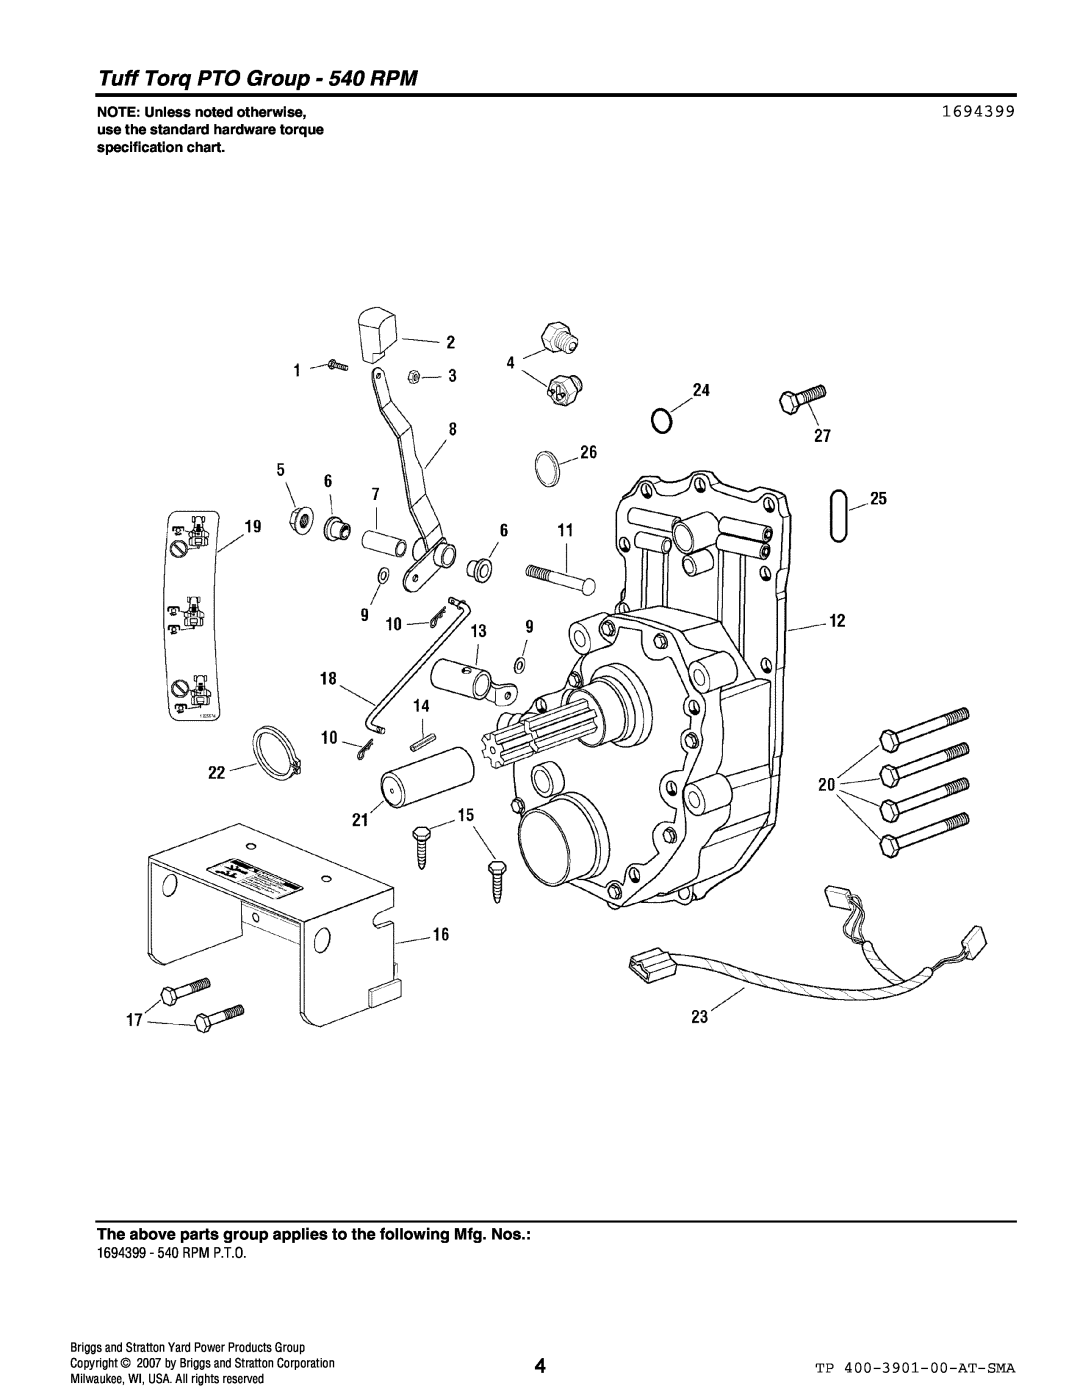 Simplicity 1694399 manual Tuff Torq PTO Group - 540 RPM, NOTE: Unless noted otherwise 